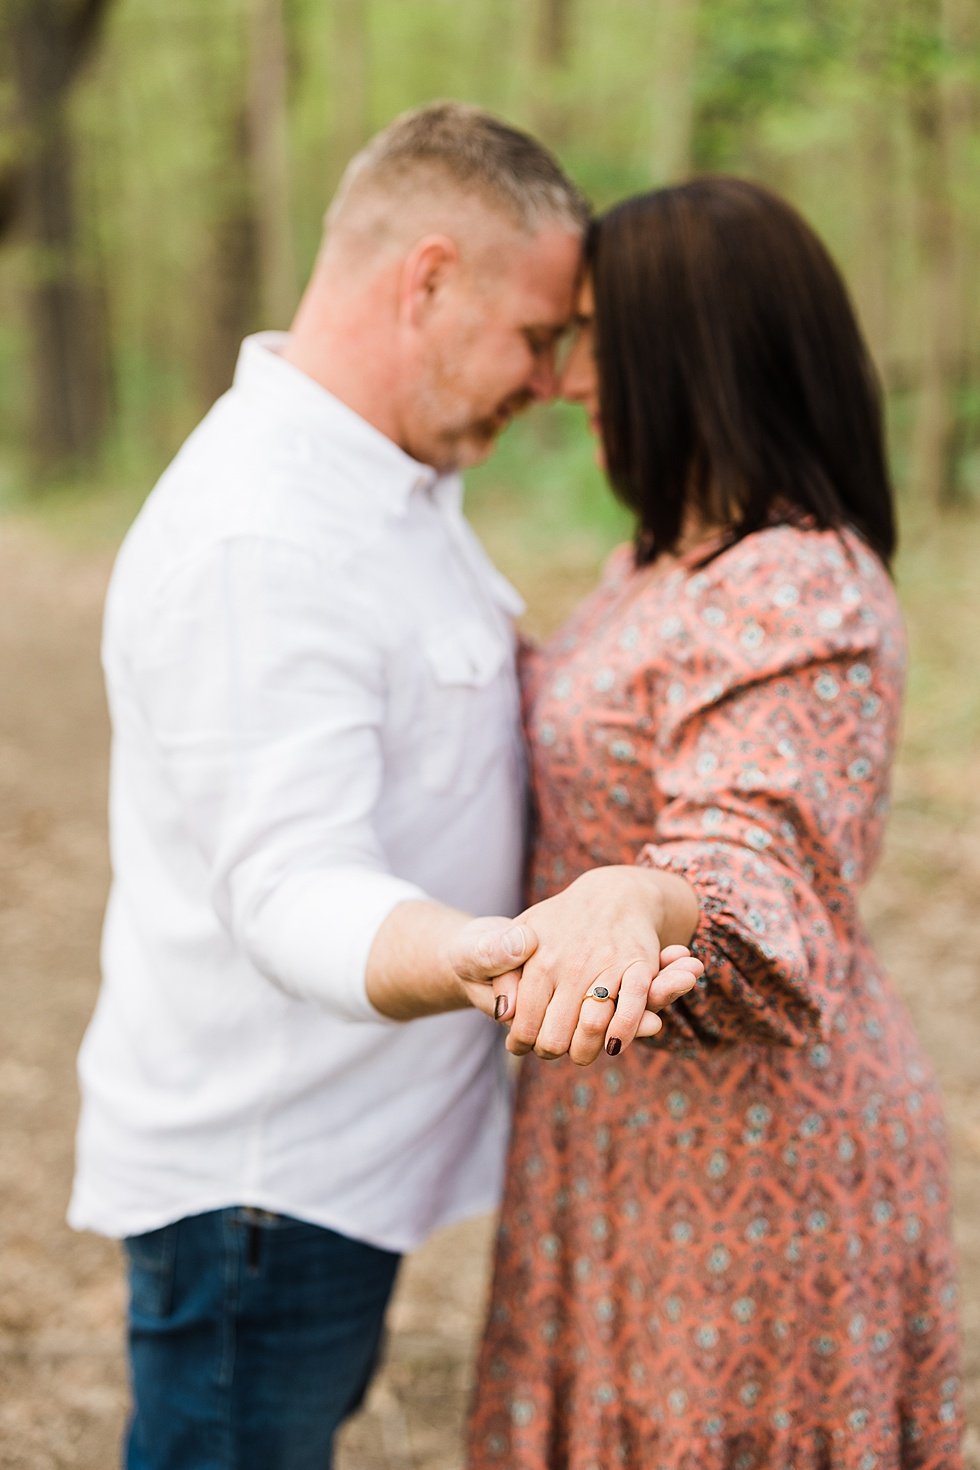  SPRING ENGAGEMENT SESSION AT CLIFTY FALLS STATE PARK MADISON, INDIANA 